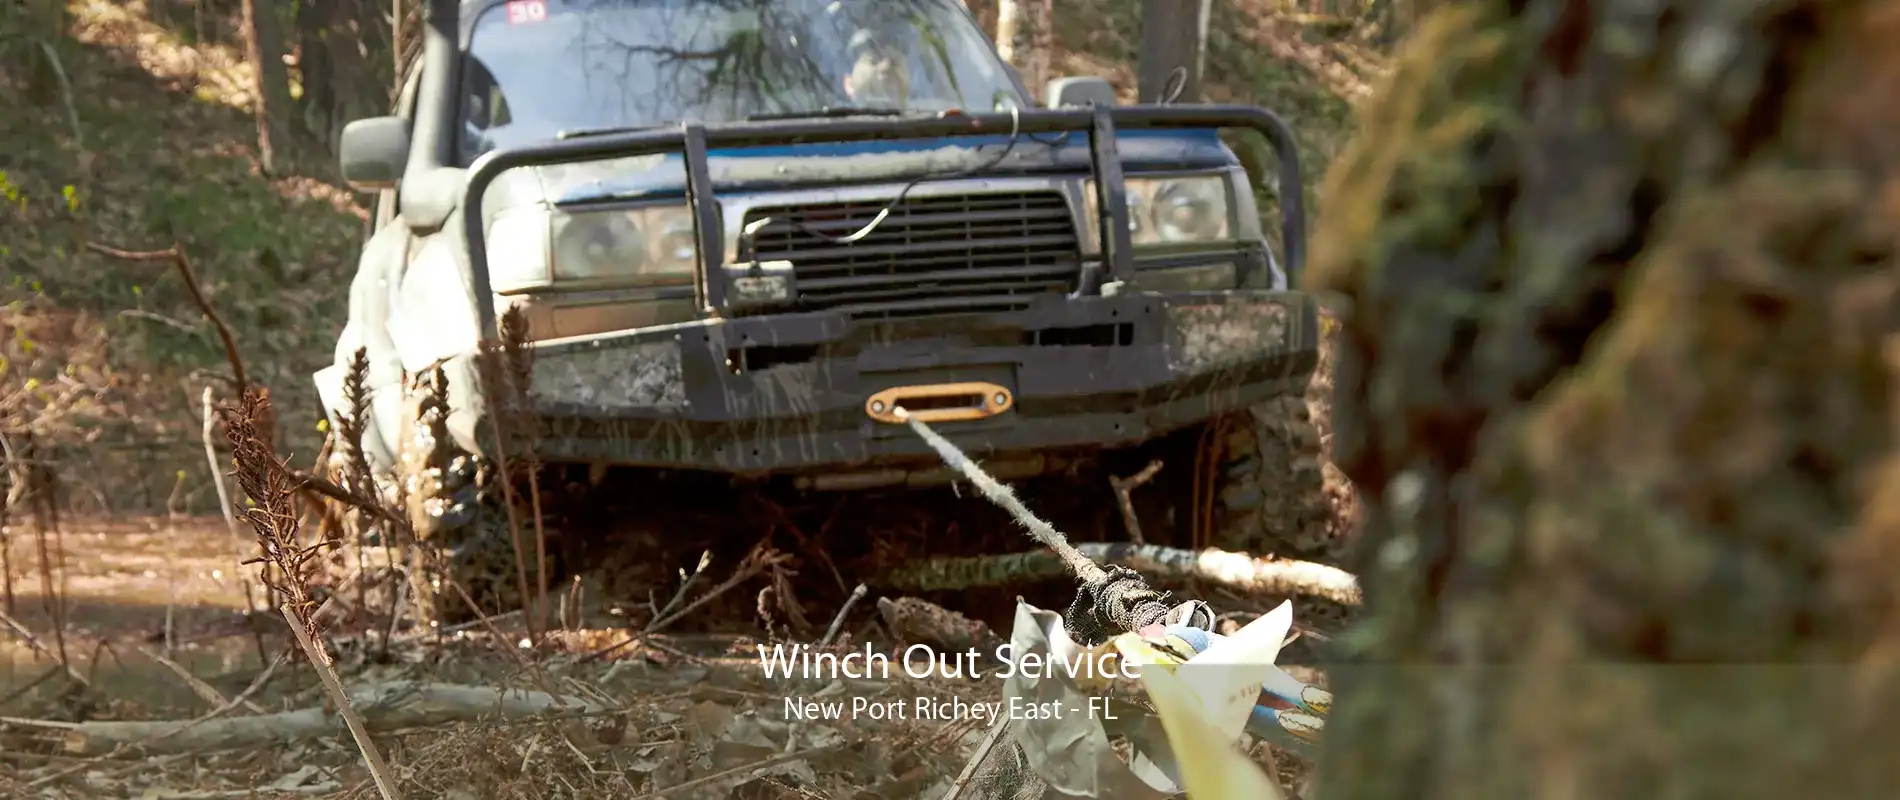 Winch Out Service New Port Richey East - FL